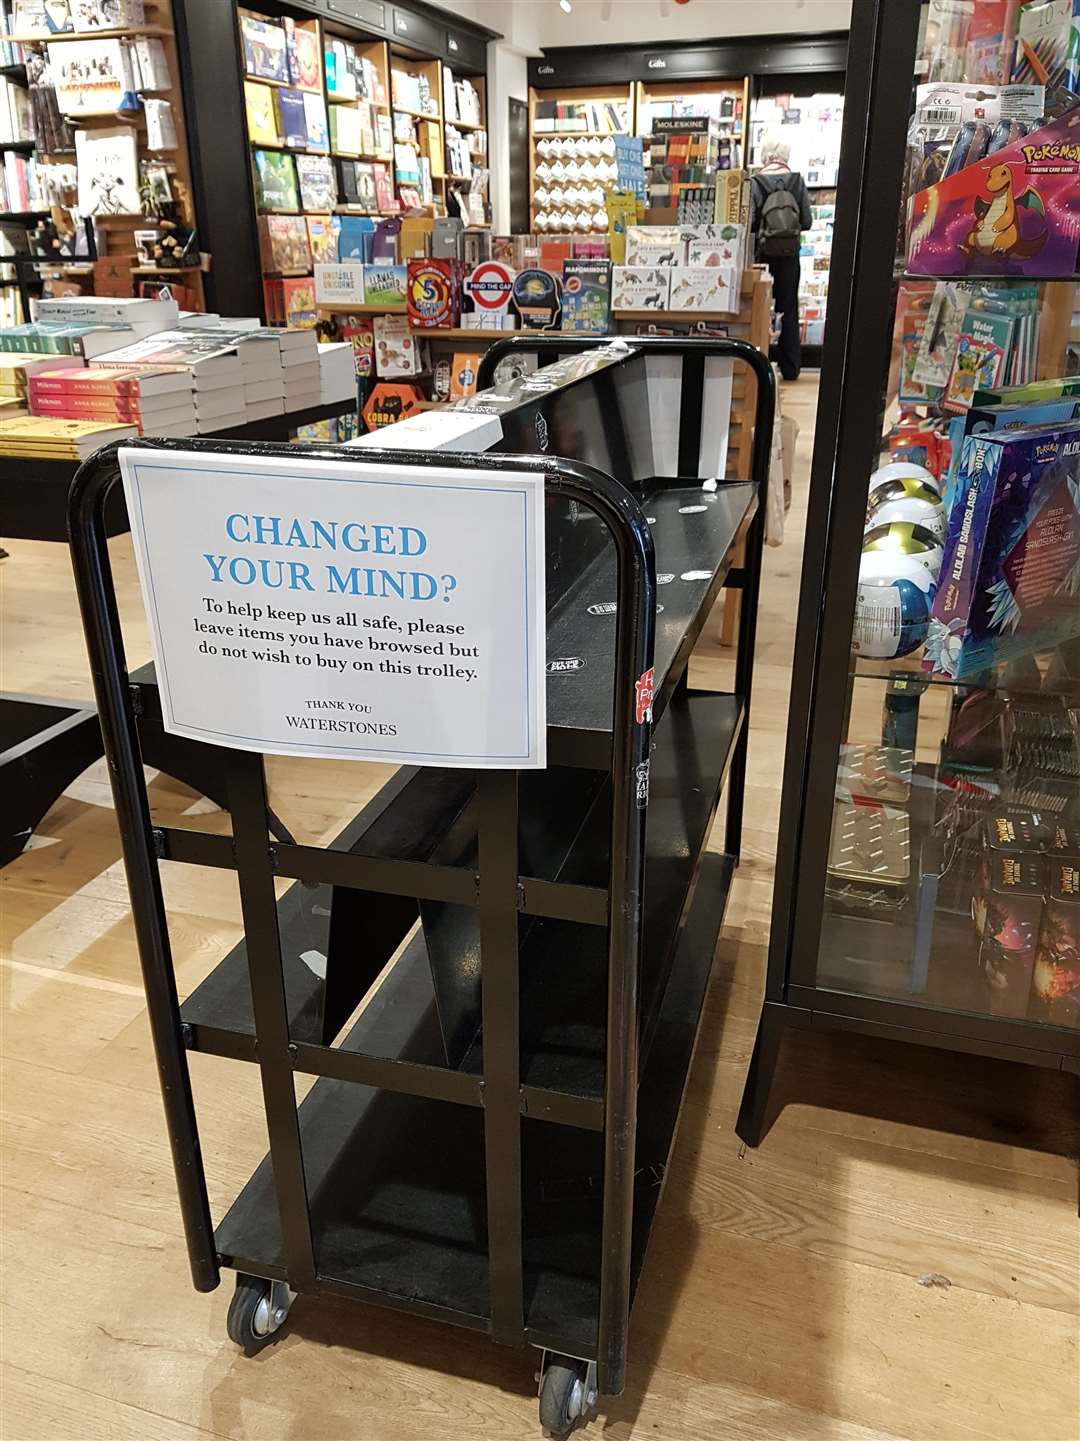 Change-your-mind trolley at Waterstone's book shop in Tunbridge Wells